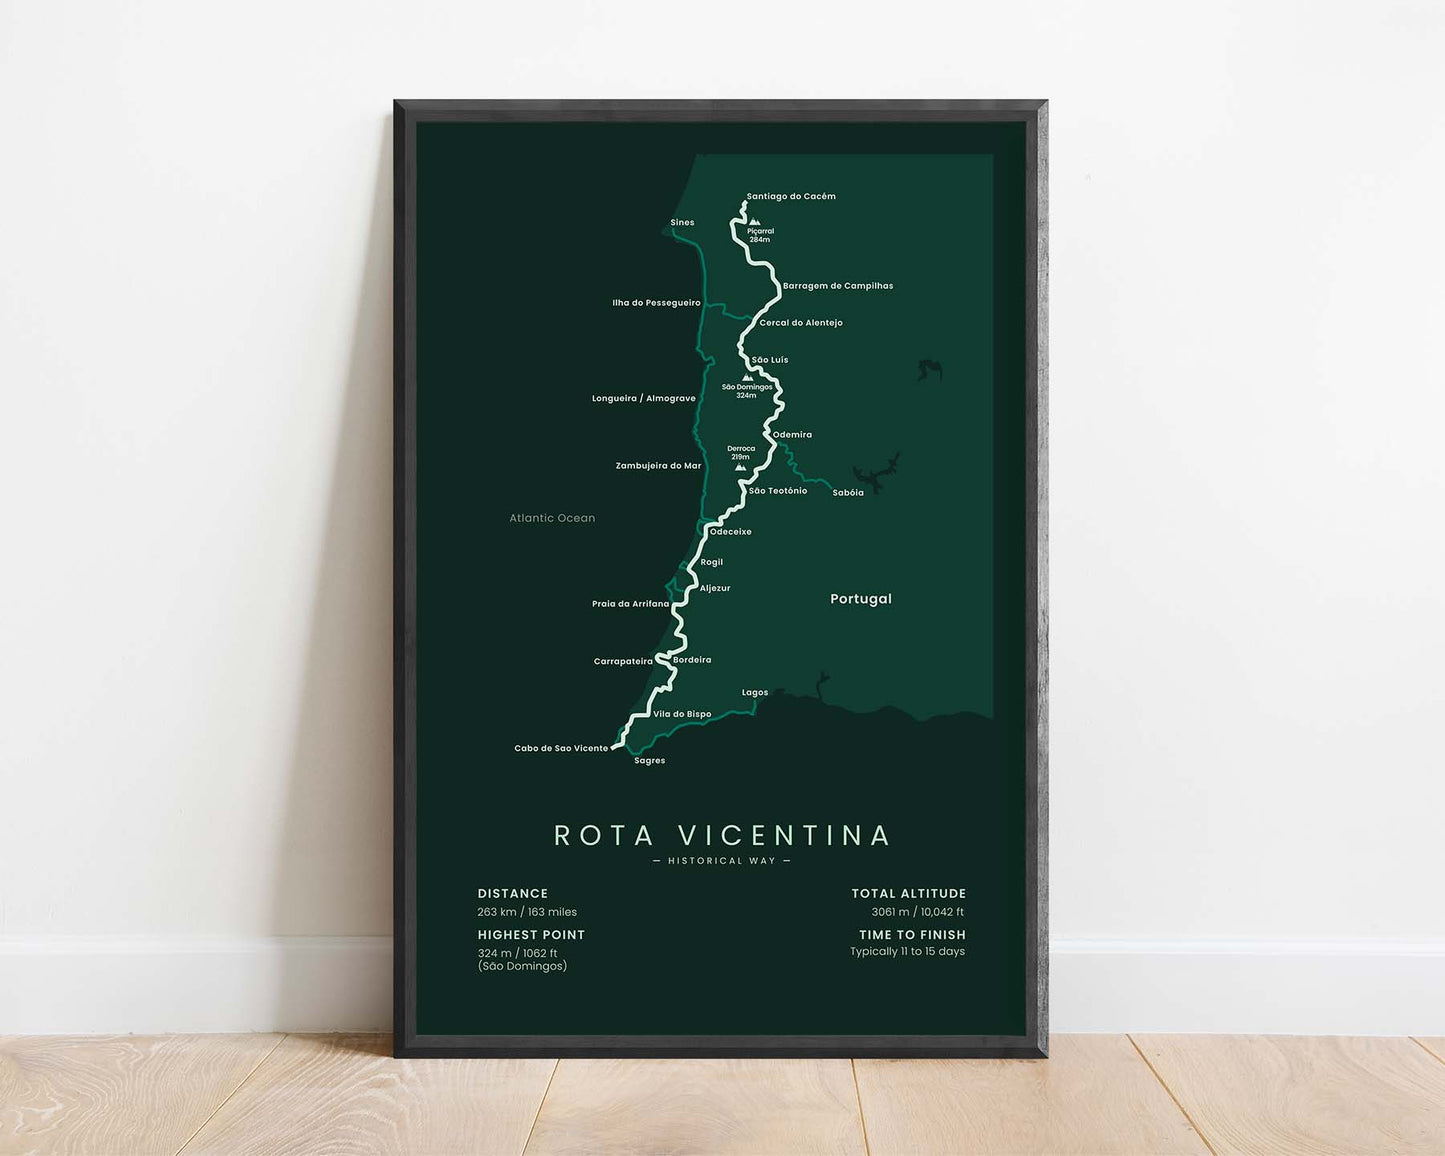 Rota Vicentina Historical Way (Portugal) Track Map Art with Green Background